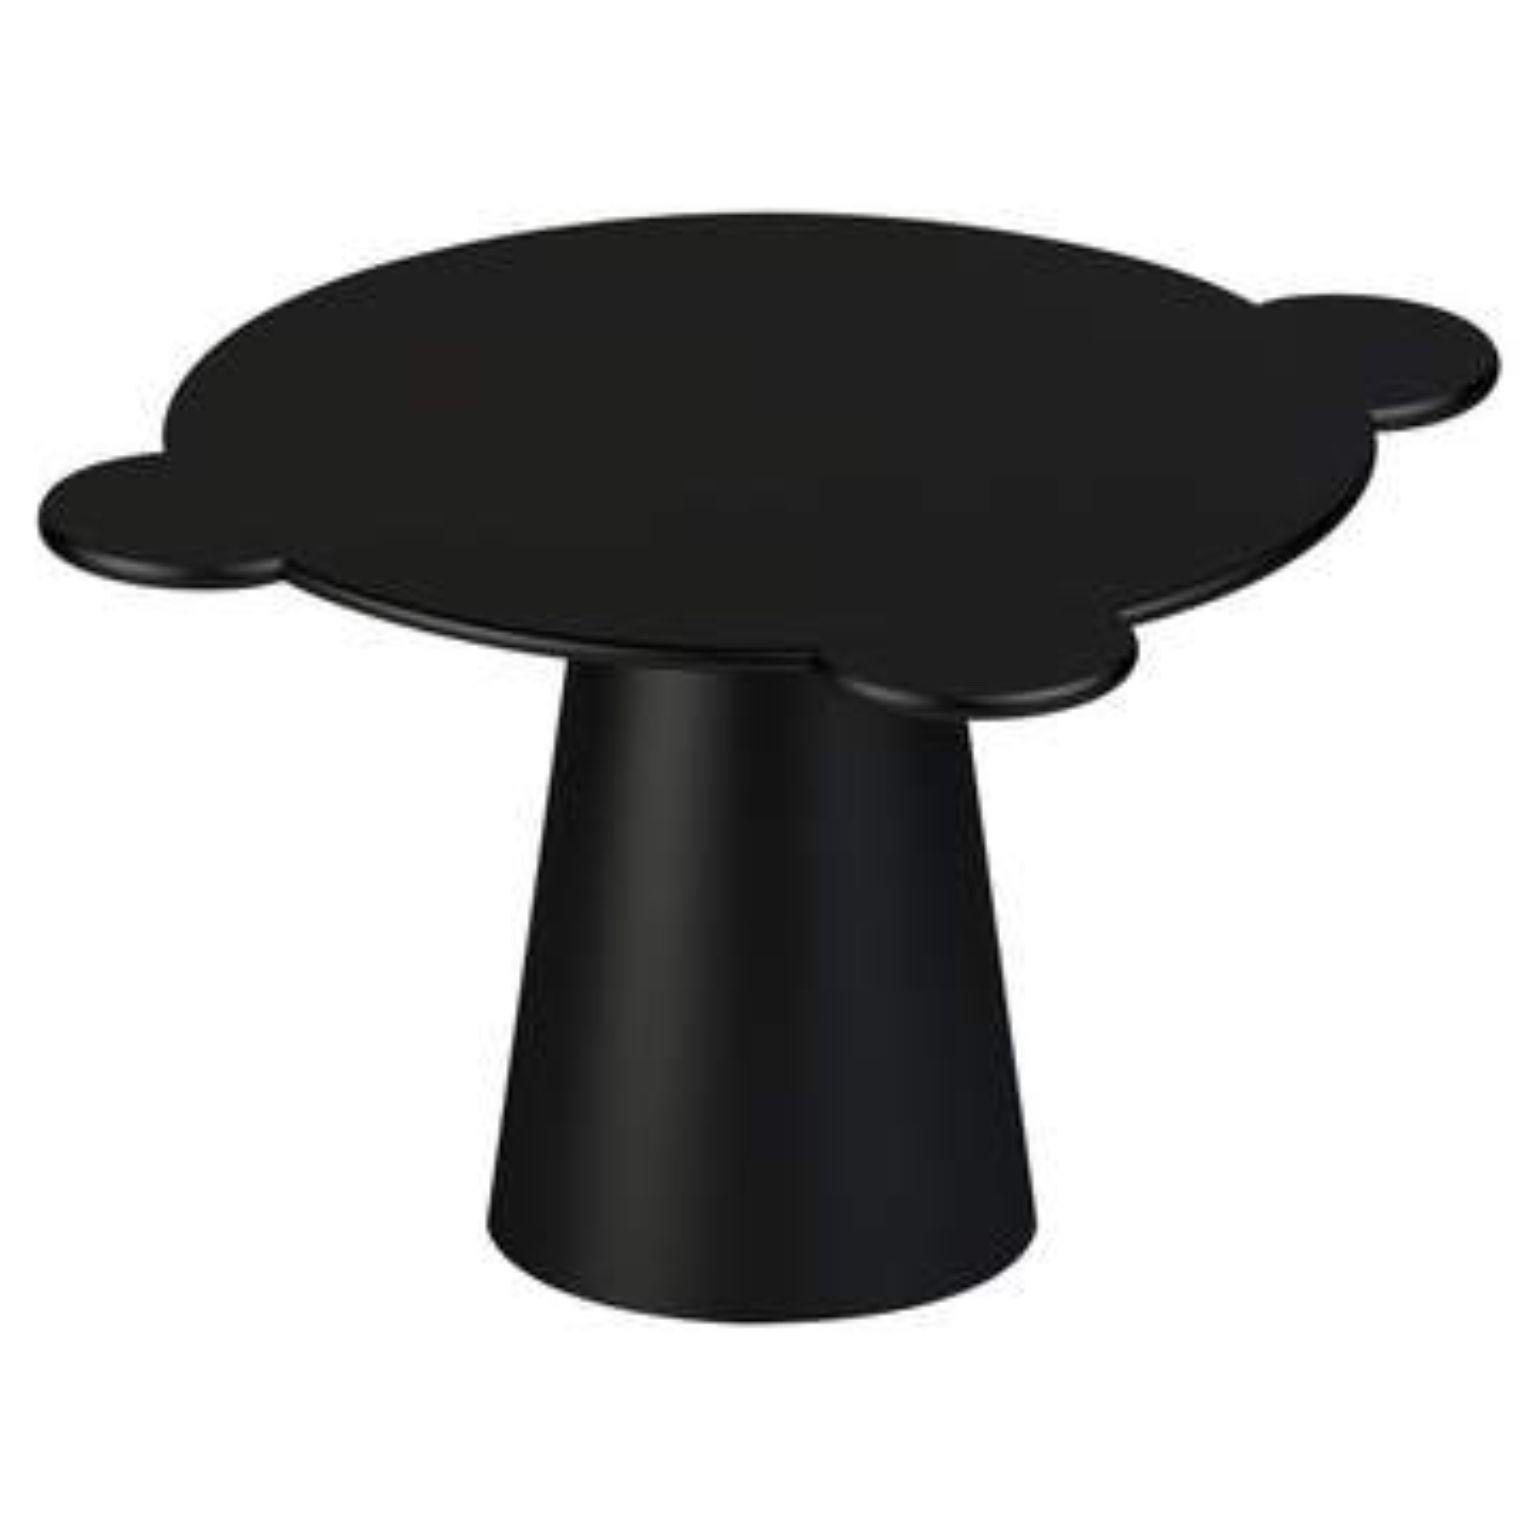 Black wood contemporary Donald table by Chapel Petrassi
Dimensions: ? 140 x 77,5 cm
Materials: Black lacquered wood 

Chapel Petrassi is a contemporary design and manufacturing company based in Paris and Naples founded by designers